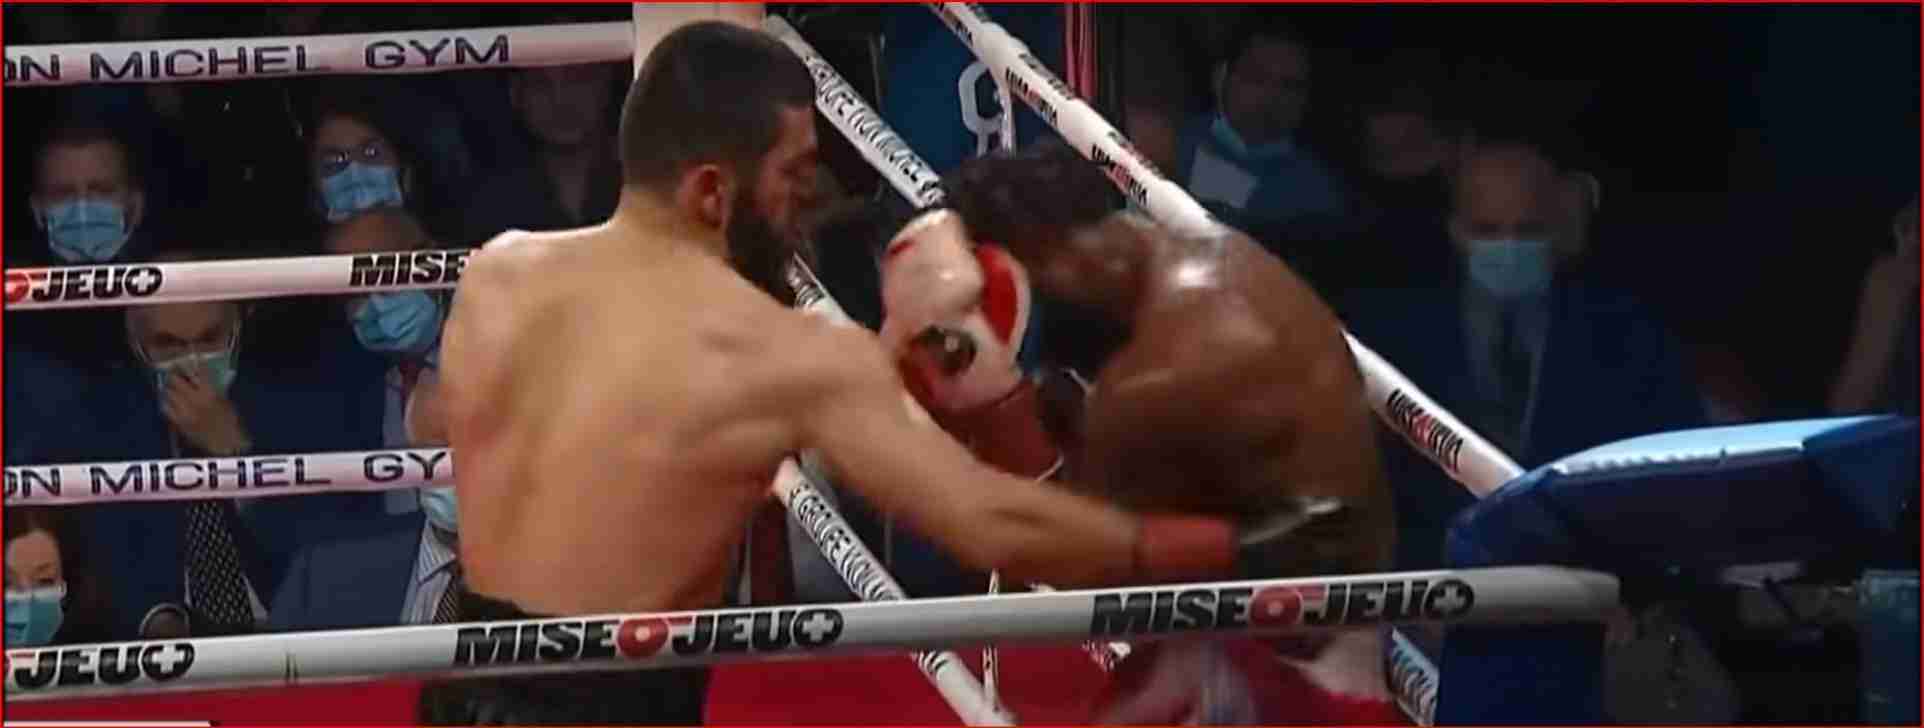 Watch: Biggest Puncher In Boxing Knocks Out Opponent In Round 9